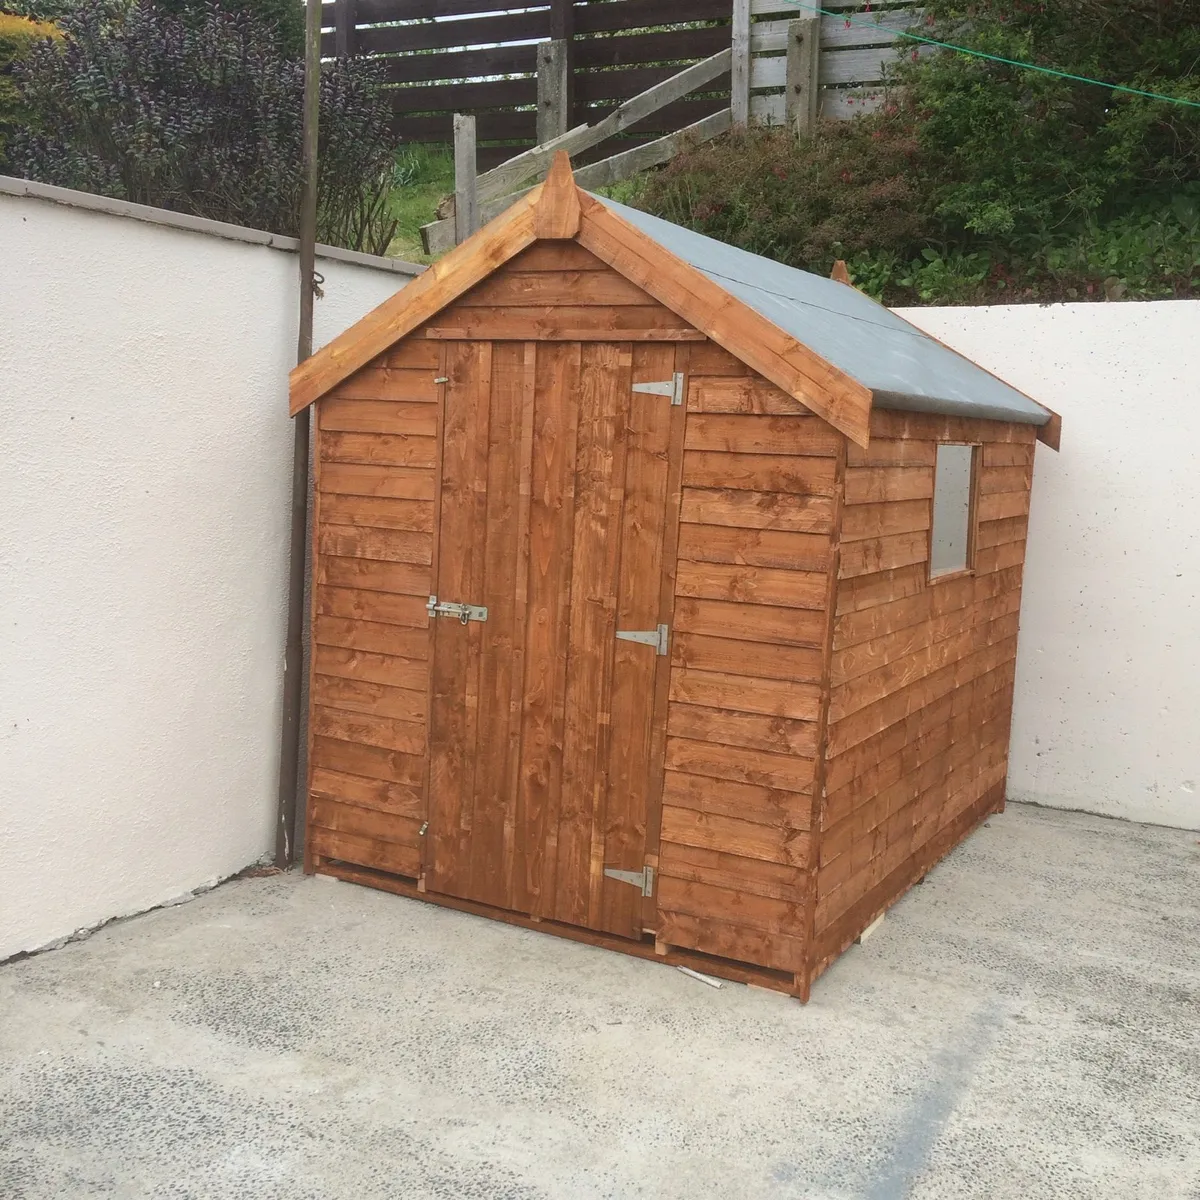 GARDEN SHED SALE !! 8ft x 6ft RUSTIC ONLY €495.00